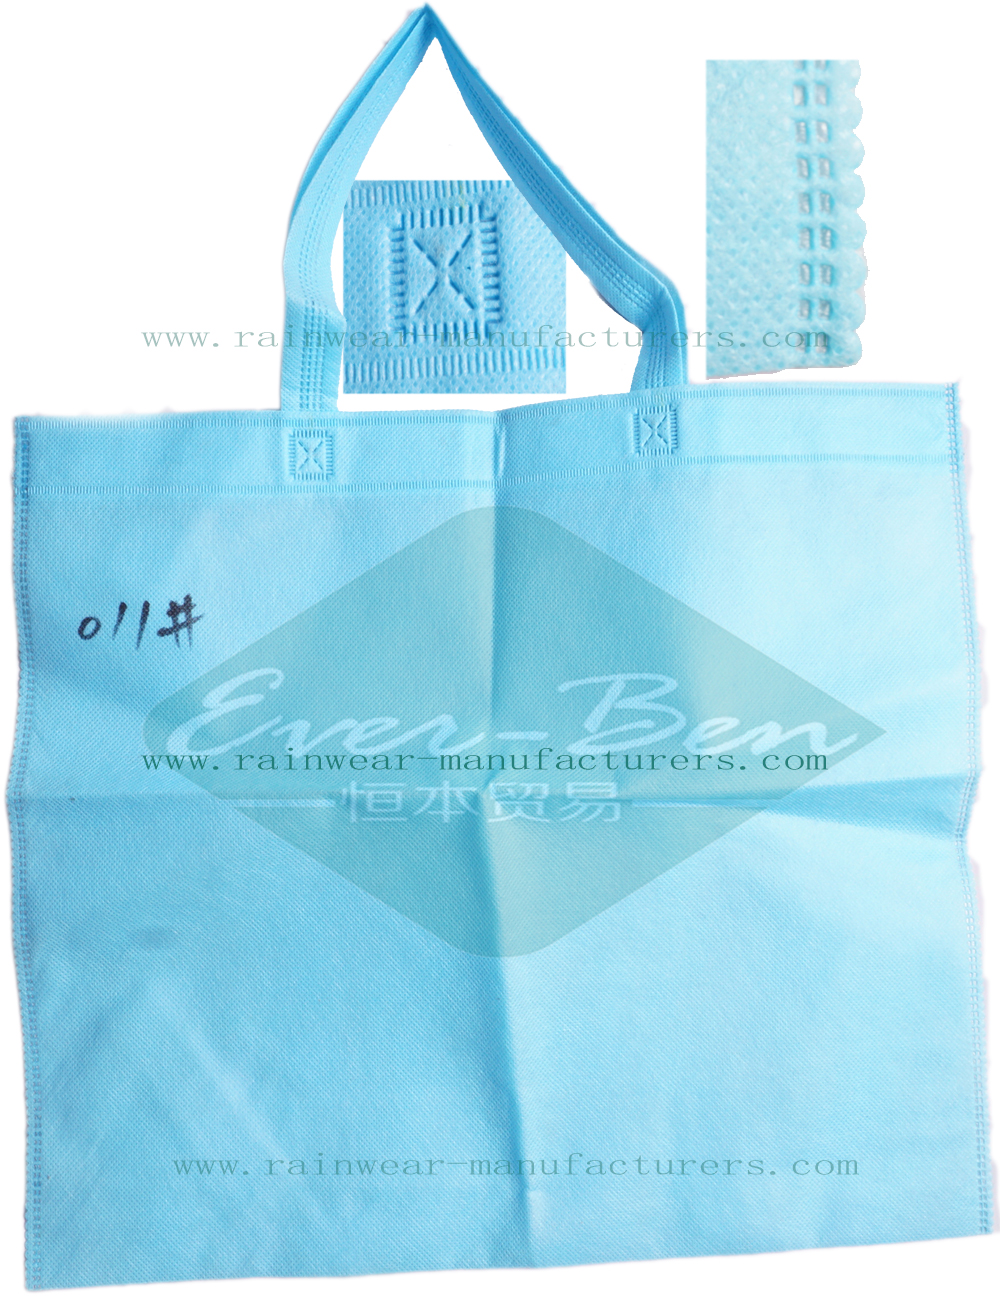 013 non woven fabric bags manufacturer